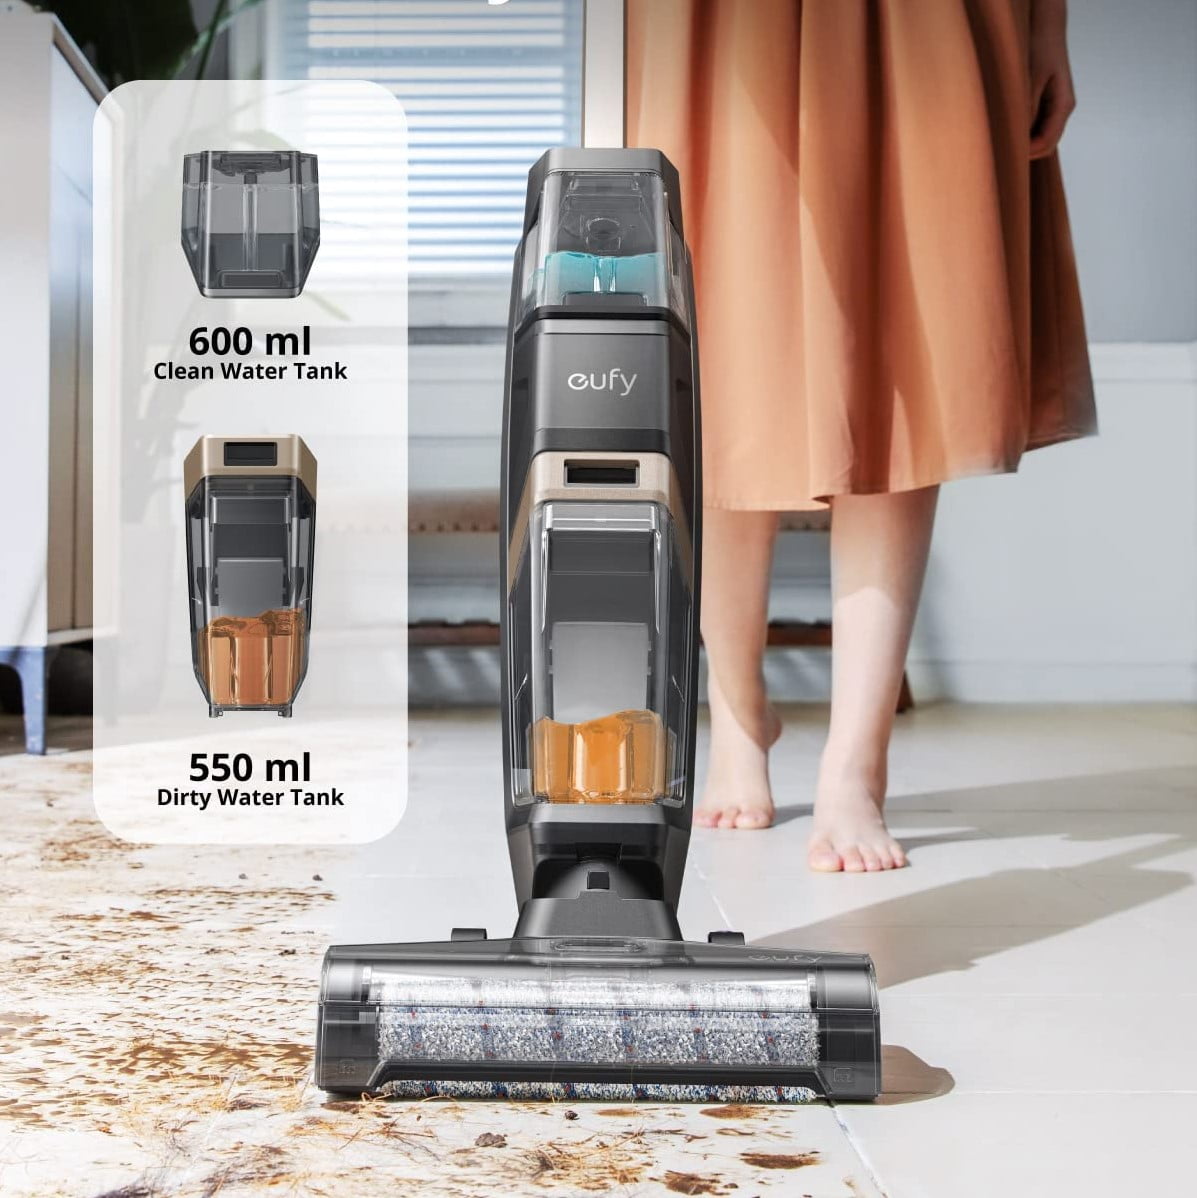 Eufy Wetvac W31 Wet Dry Vacuum Cleaner And Mop